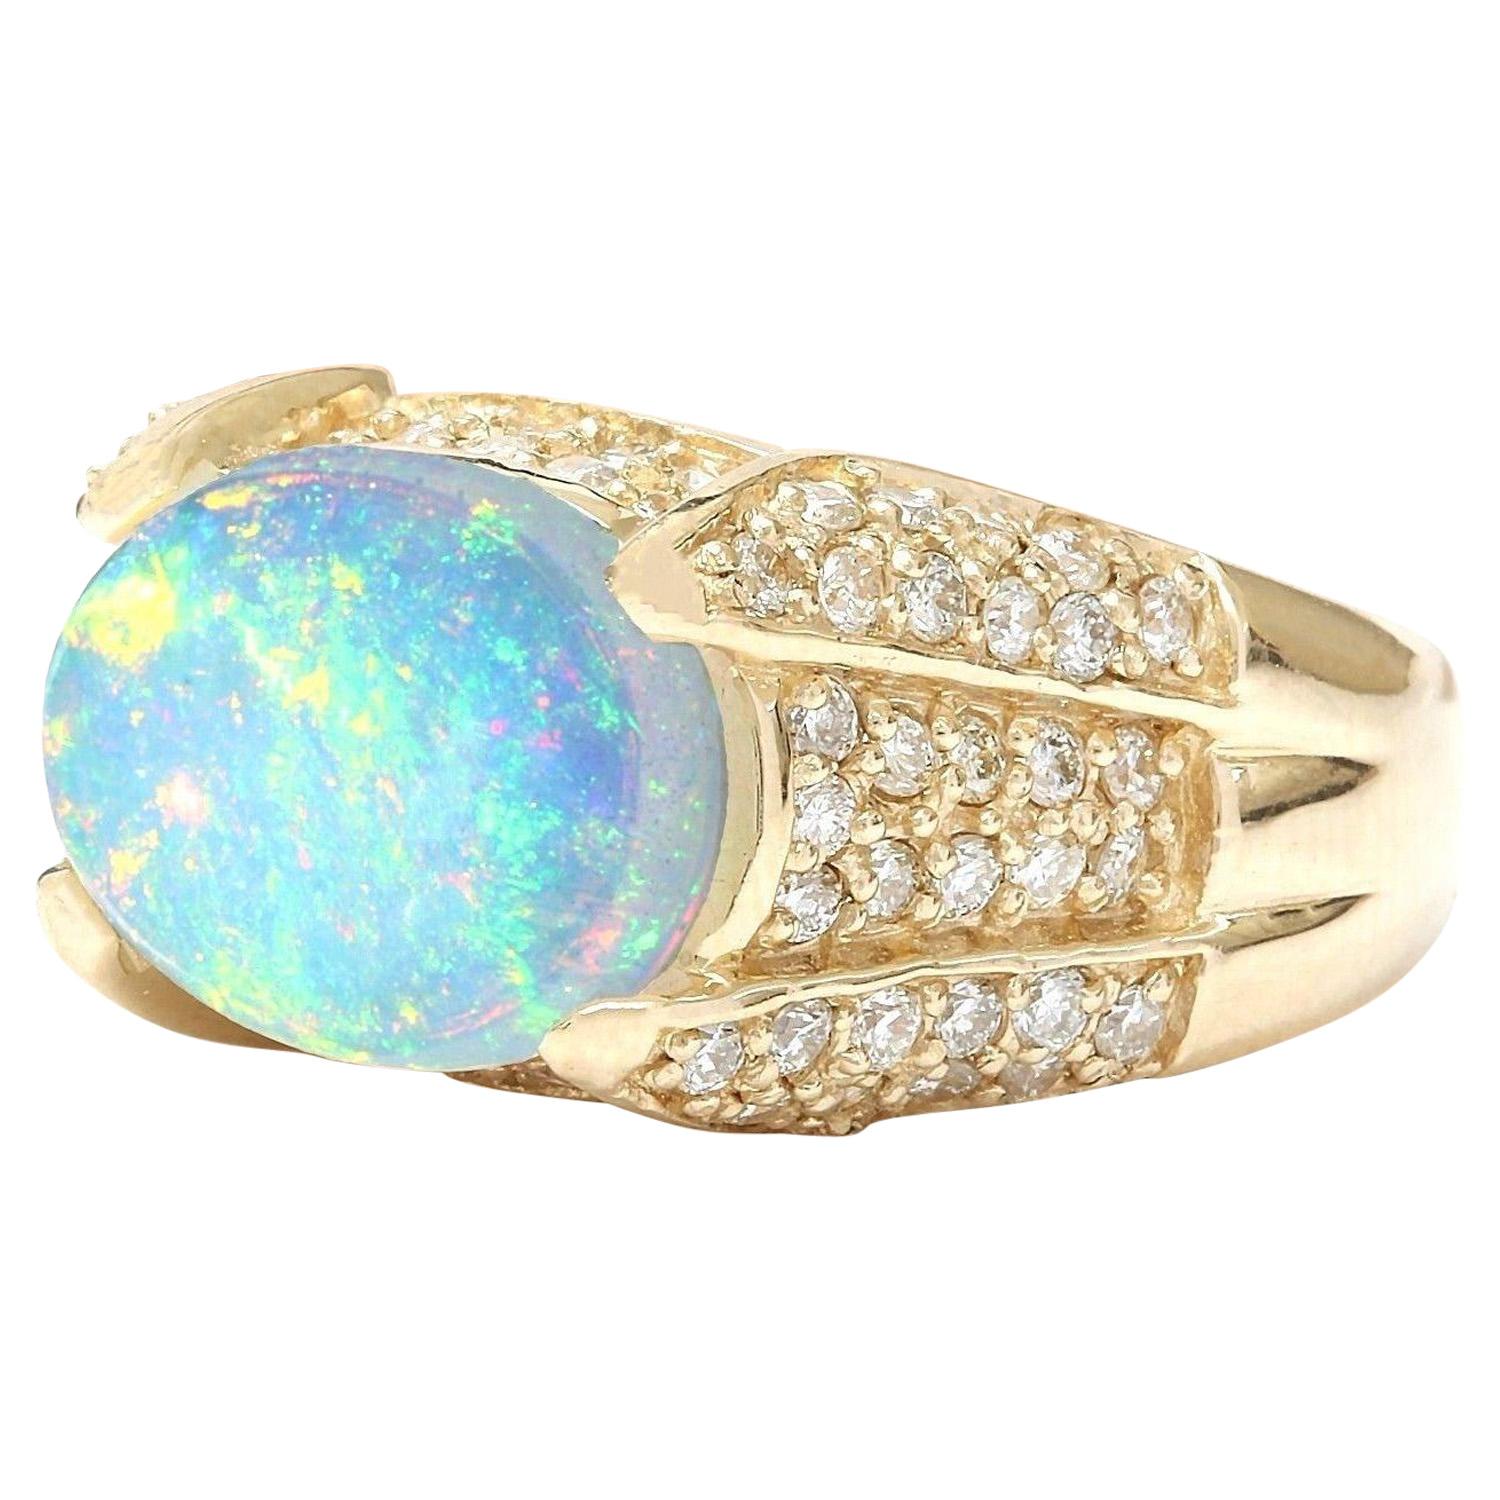 5.90 Carat Natural Opal 14K Solid Yellow Gold Diamond Ring
 Item Type: Ring
 Item Style: Cocktail
 Material: 14K Yellow Gold
 Mainstone: Opal
 Stone Color: Multicolor
 Stone Weight: 4.80 Carat
 Stone Shape: Oval
 Stone Quantity: 1
 Stone Dimensions: